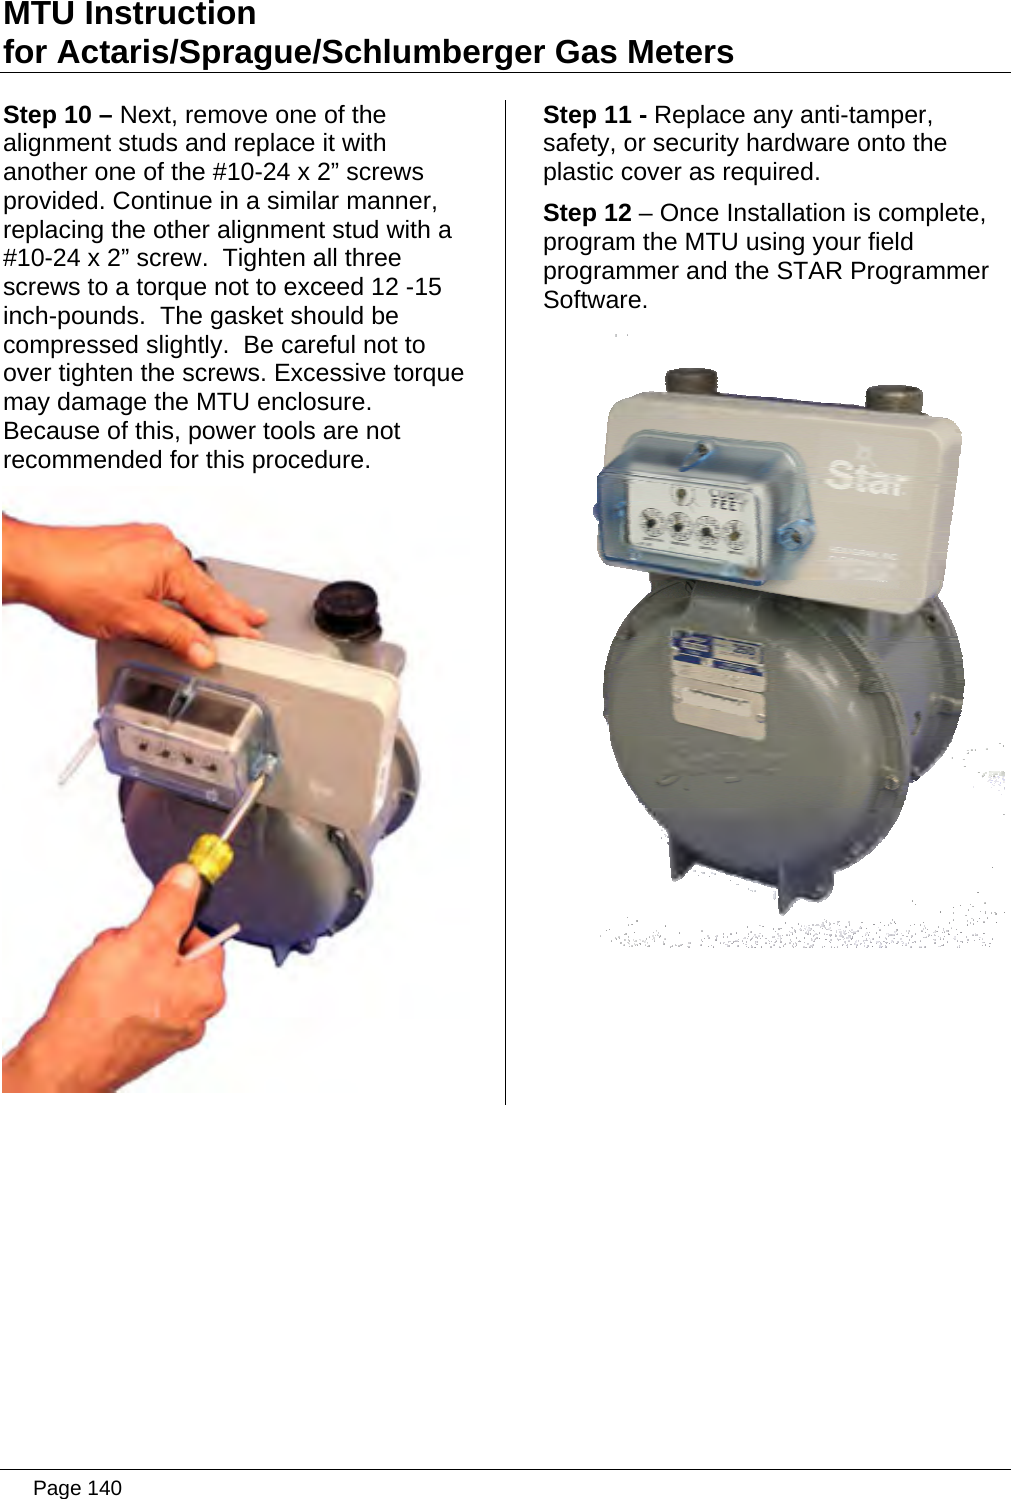 Page 140 of Aclara Technologies 09015 Transmitter for Meter Reading User Manual users manual